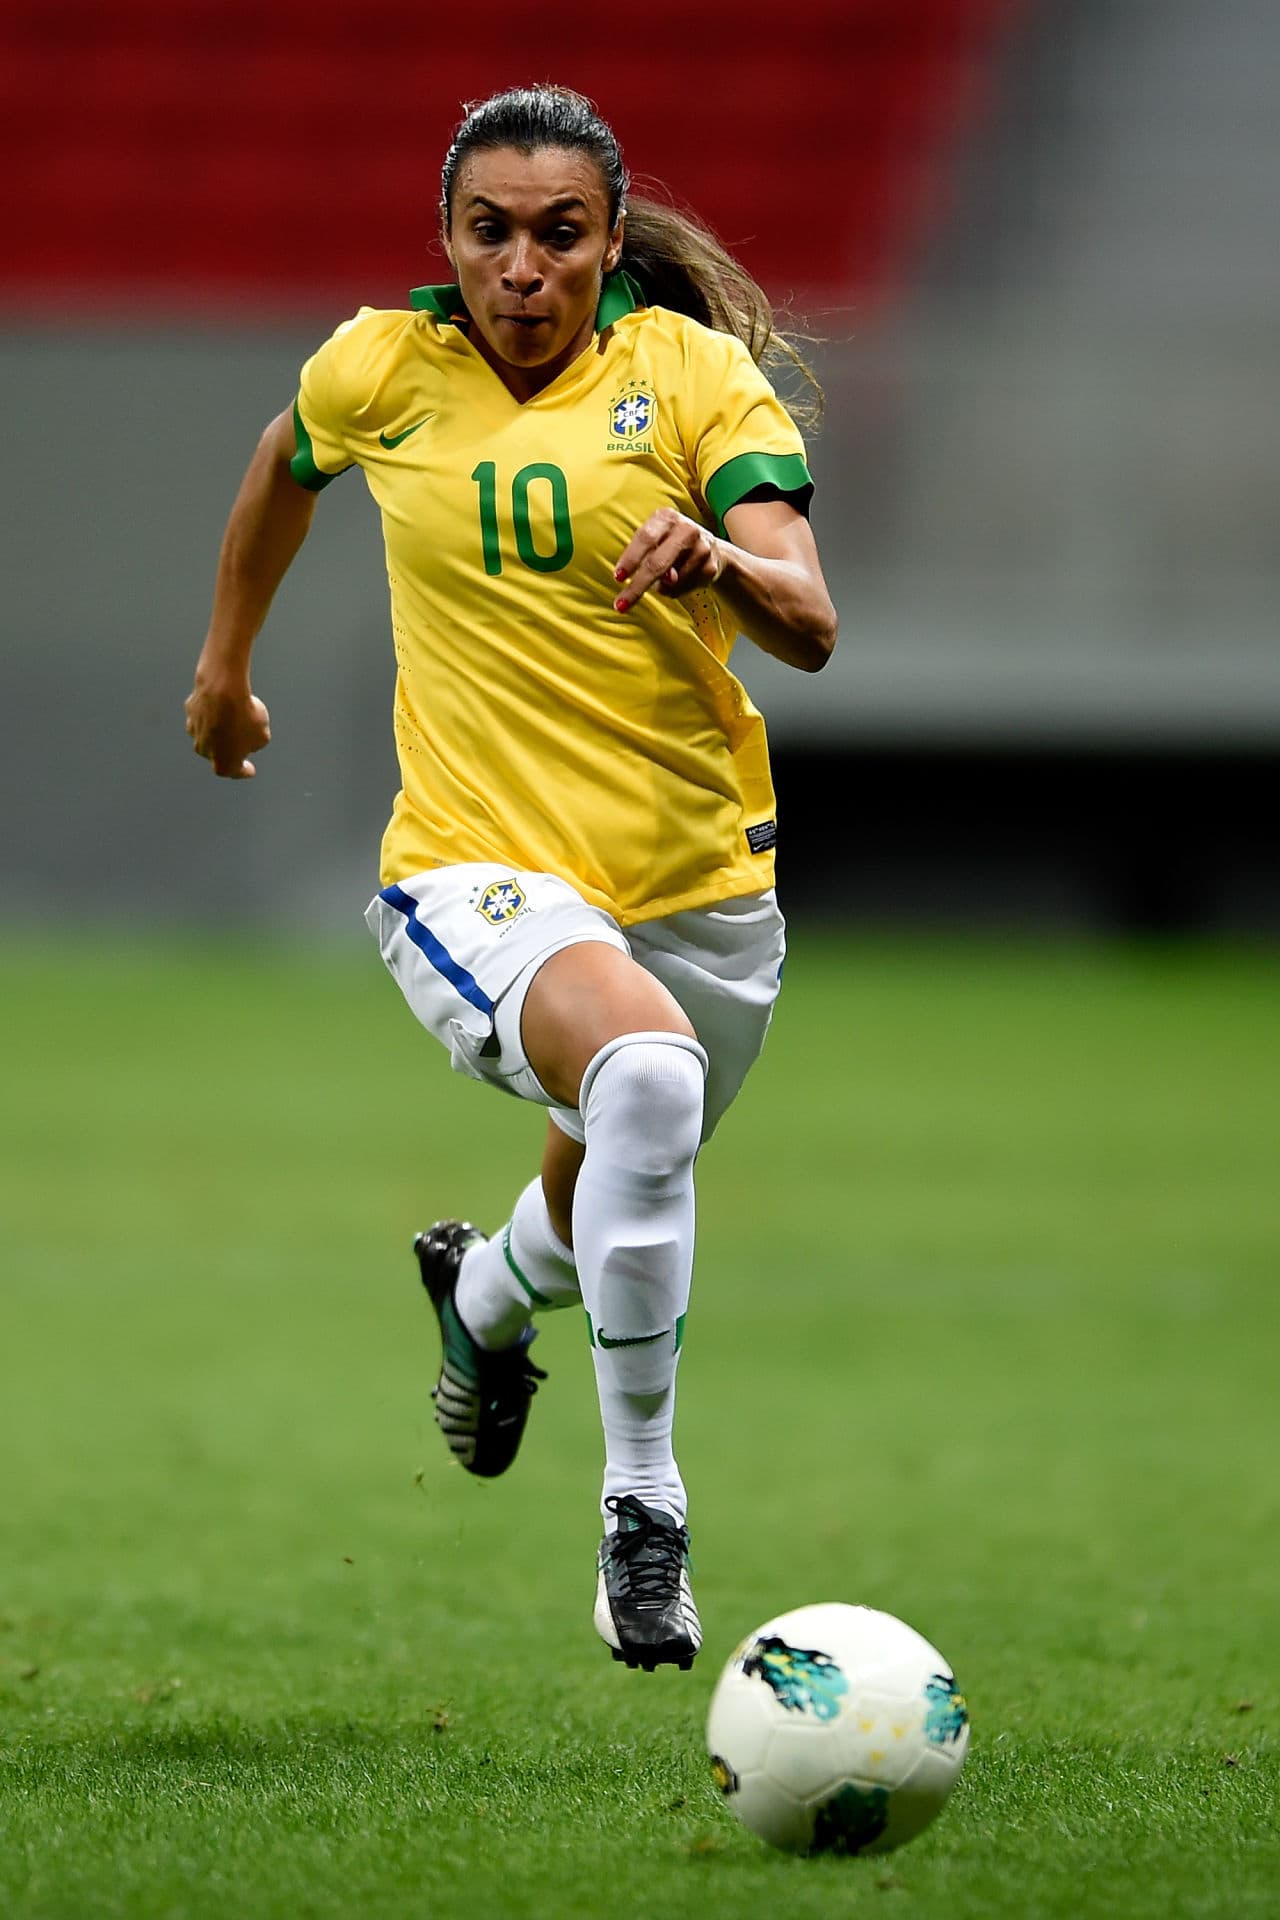 Brazil's Marta has said that encouraging women to play soccer is as important as winning a World Cup. (Buda Mendes/Getty Images)